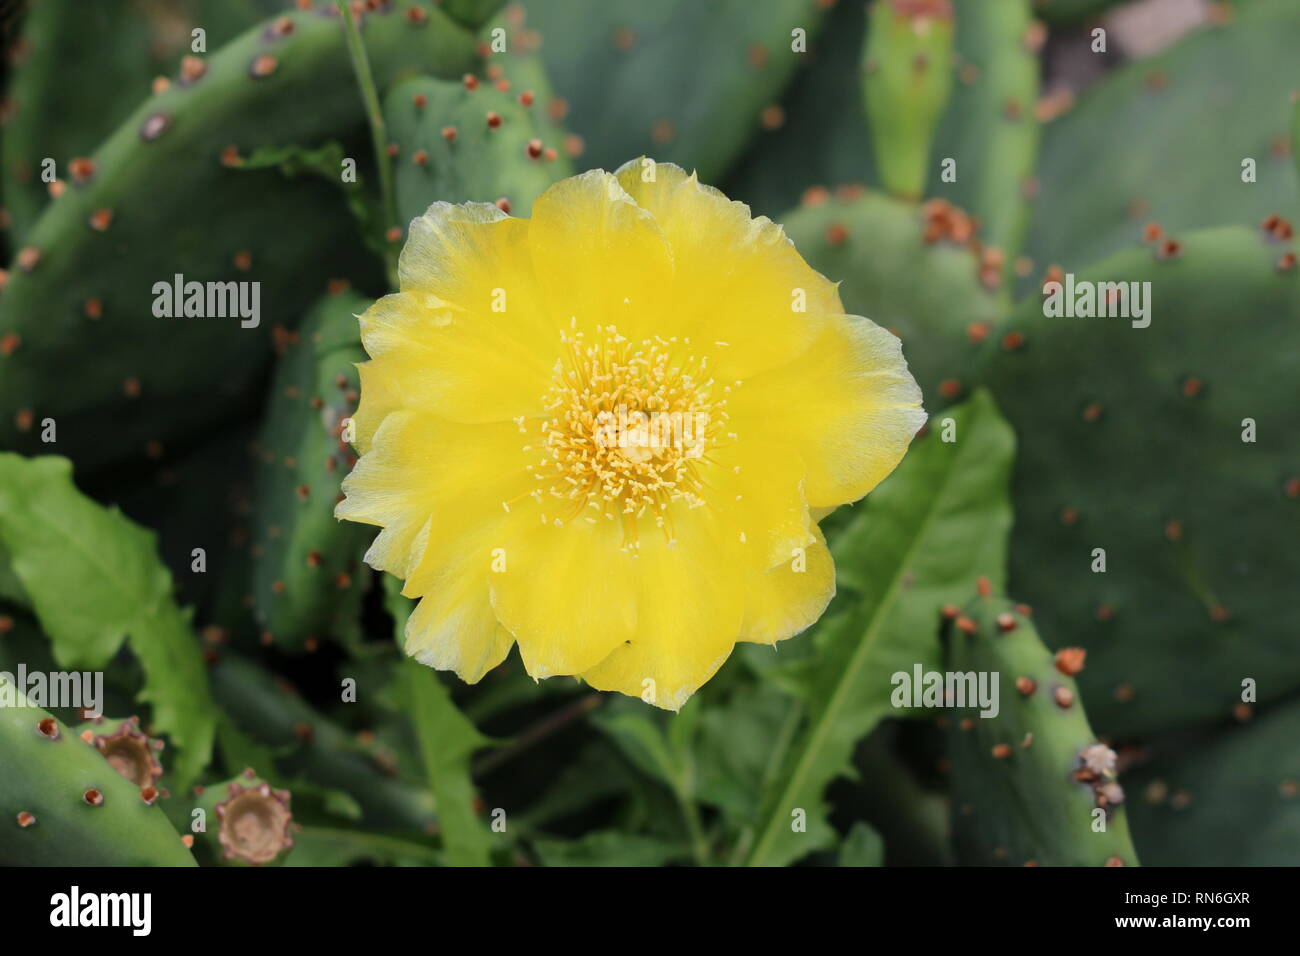 Bright yellow fully open blooming flower of Barbary fig or Opuntia ficus-indica or Prickly pear or Indian fig opuntia or Cactus pear Stock Photo